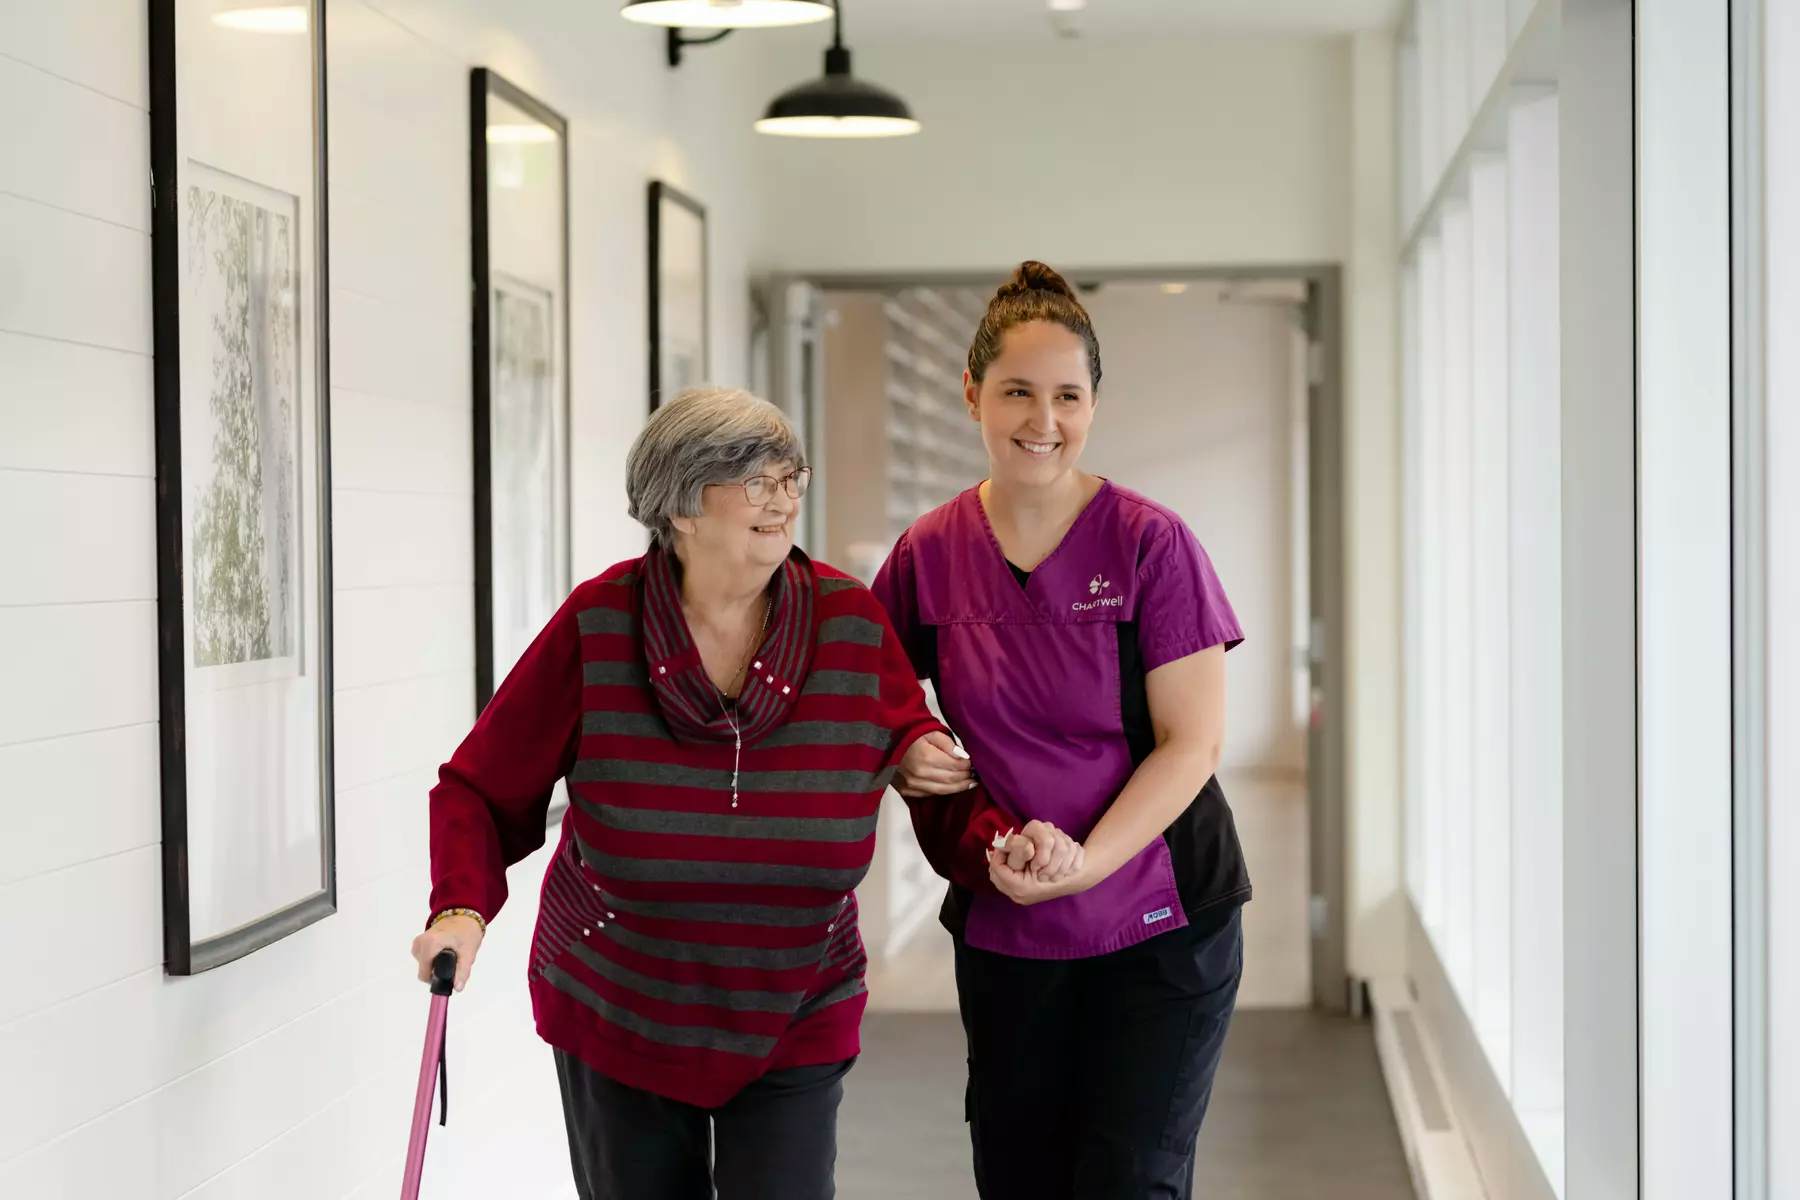 Chartwell Care staff  helping senior resident walk by holding her hand